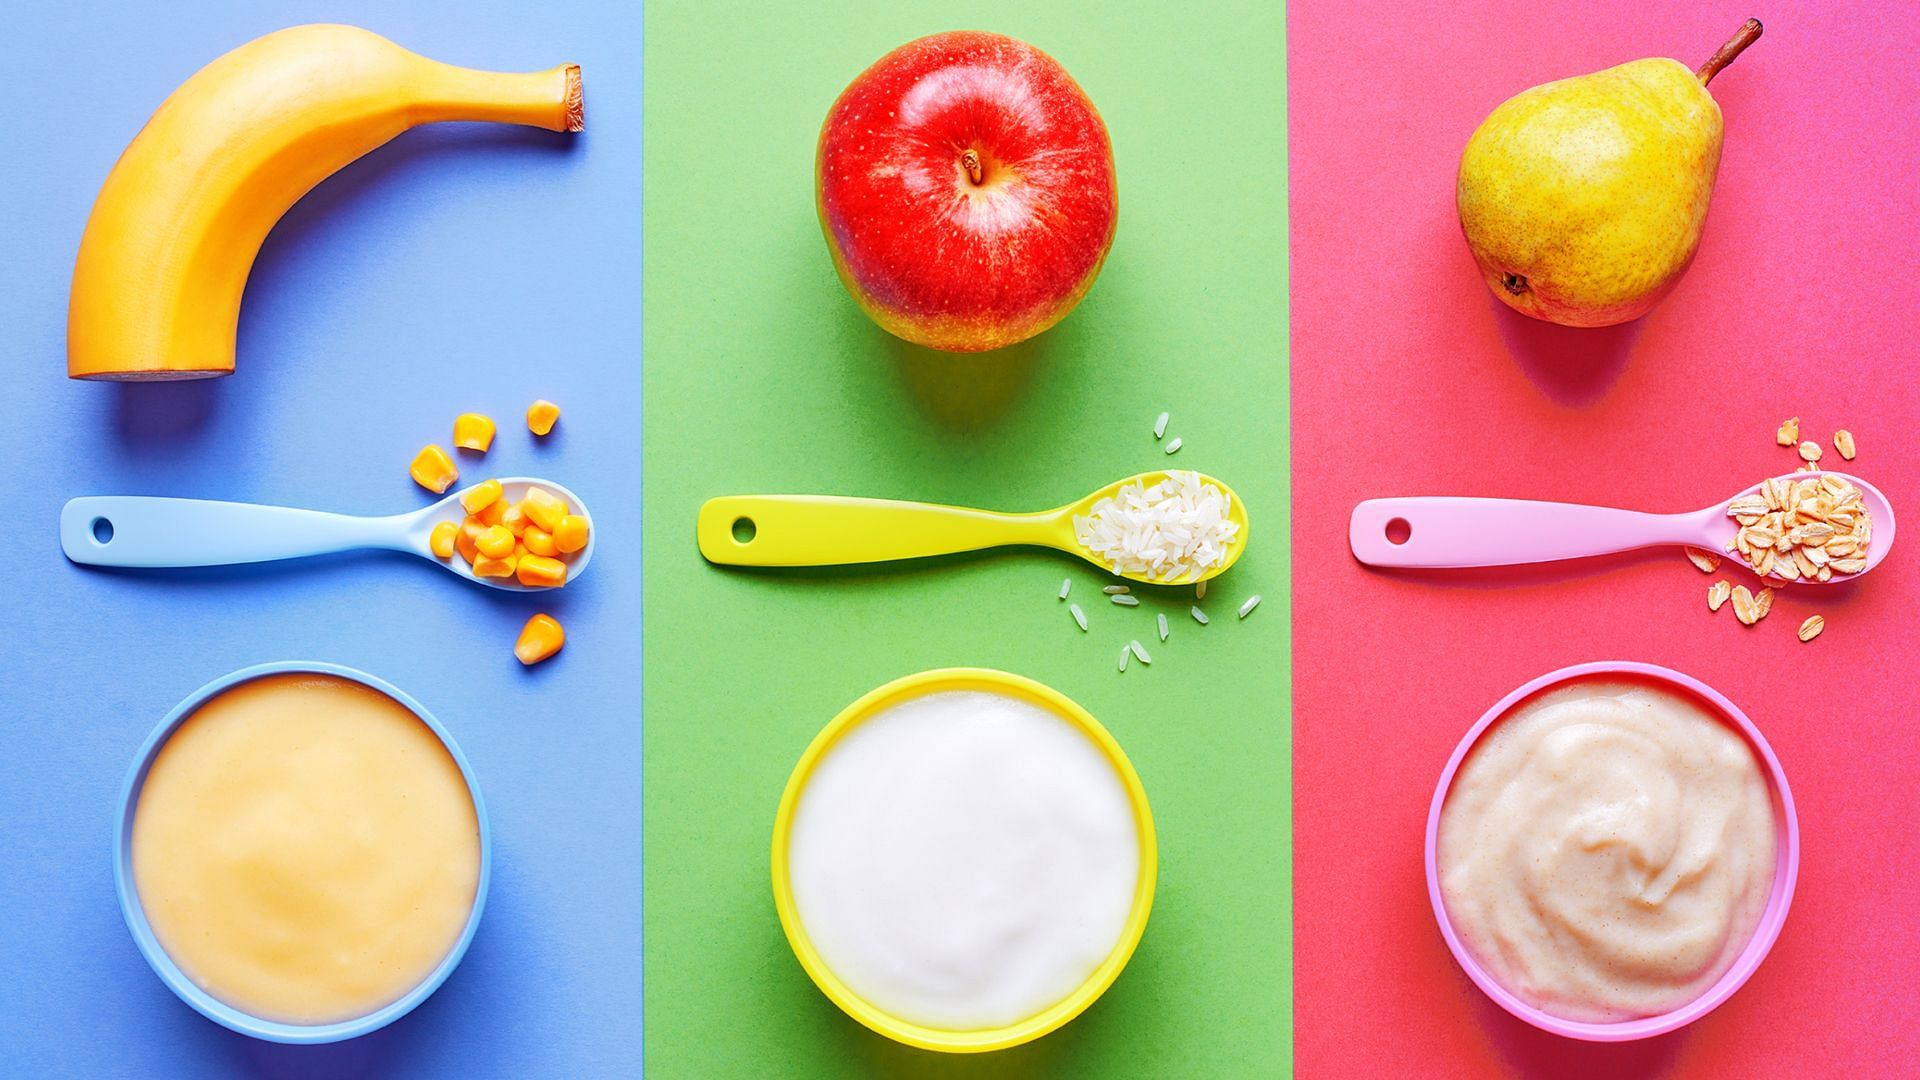 Baby food is made with multiple vegetables, fruits, and grains to ensure a proper diet (Image via Bigacis/Getty Images)